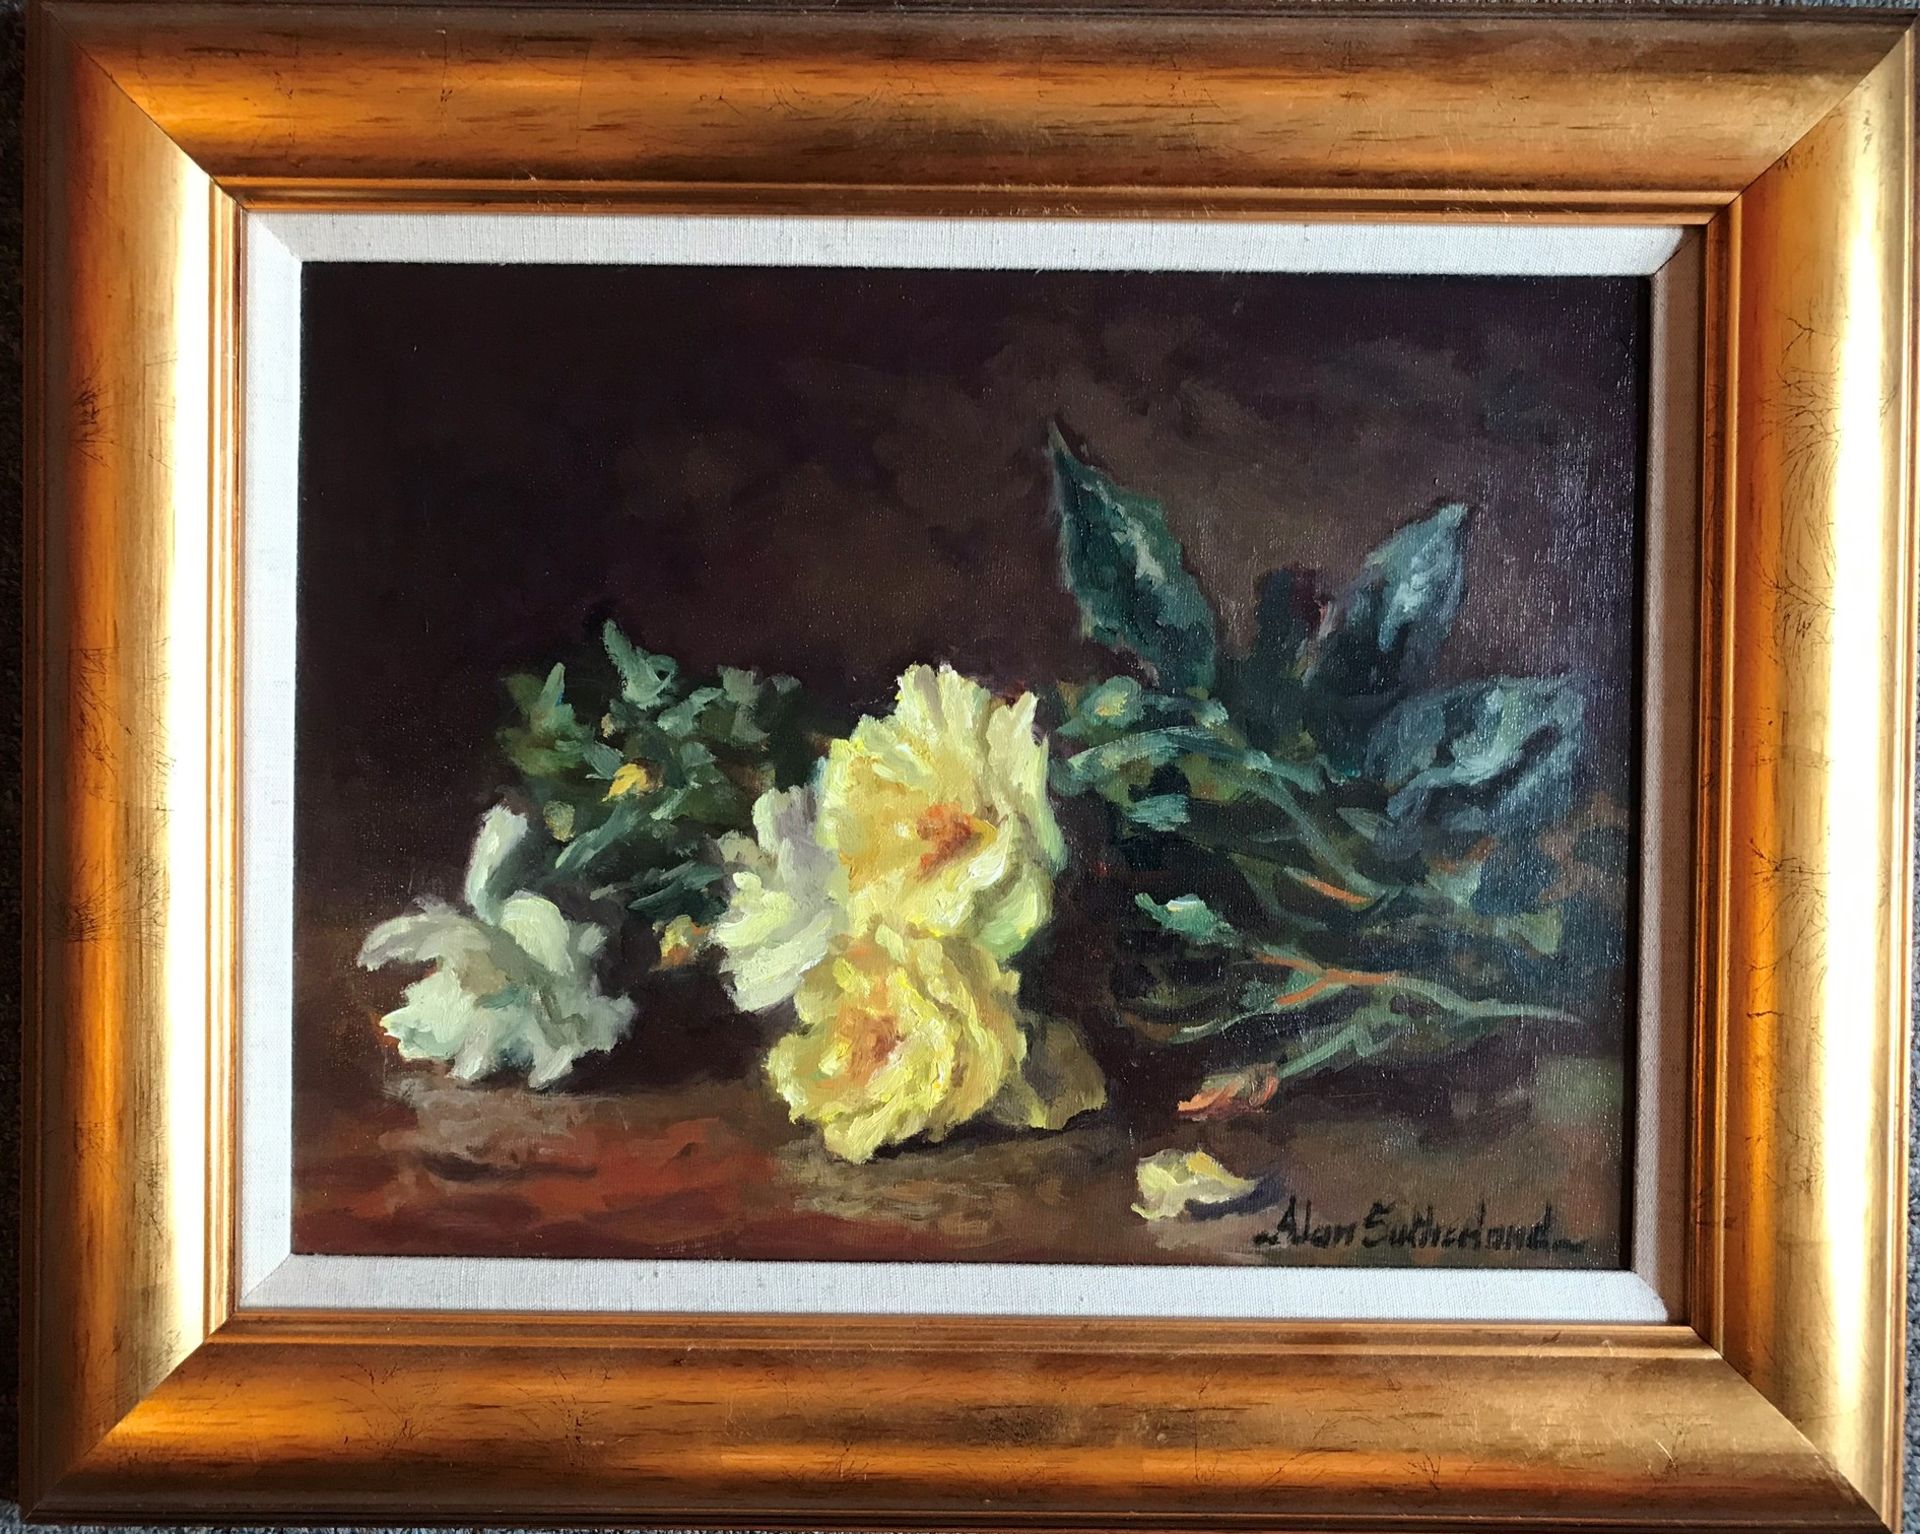 Alan Sutherland Bn 1931 British Artist Signed Oil Still Life Painting White And Yellow Roses - Image 3 of 4